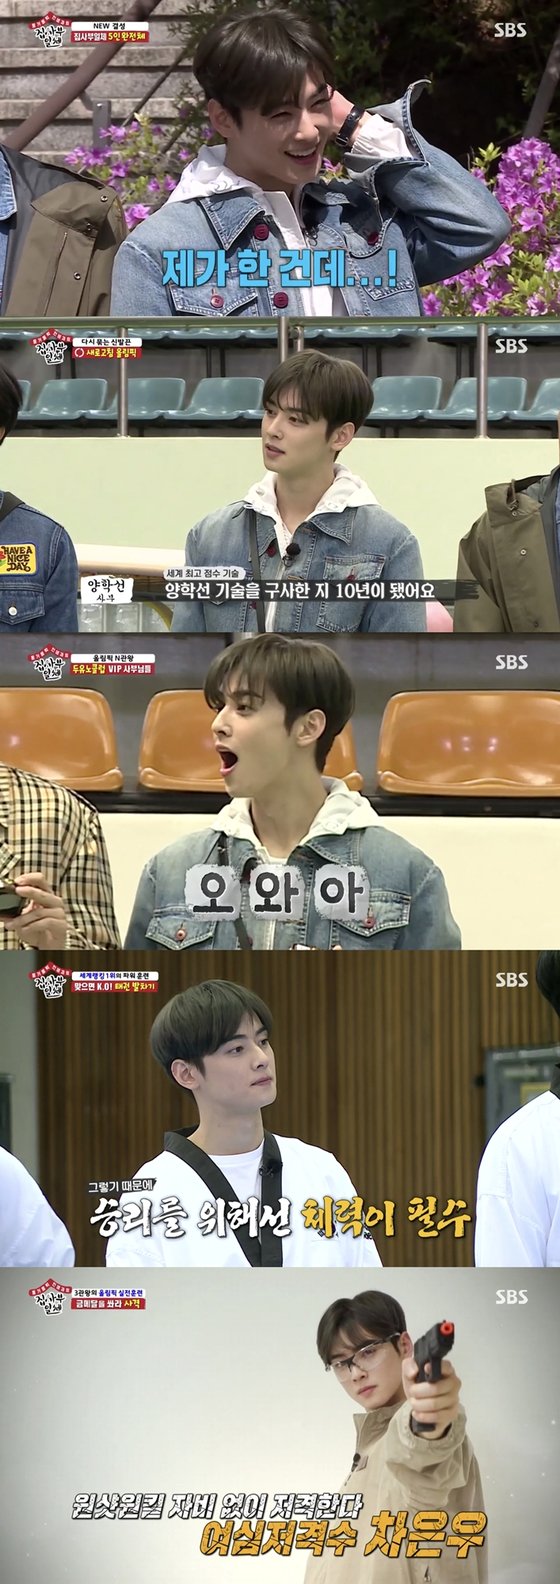 On the 3rd SBS entertainment program All The Butlers, the meeting of the five newly completed disciples and the Olympic Games Legend Master was drawn with the joining of Astro Cha Eun-woo.Cha Eun-woo said, I see this in the All The Butlers, where the 365 new Olympic Games waiting for the one-year postponed Olympic Games, showed up as the Olympian Games active Legend Jin Jong-oh, Yang Hak-sun and Lee Dae-hoon unfolded the technology. Can I?I admired it one after another.In the first Taekwondo training with Master Lee Dae-hoon, Cha Eun-woo was recognized as Ace.Cha Eun-woo, who was running Wow at the Le Bron Basketball Battle: Mortal Combat Warr demonstration, whose masters dimension is different, was immediately involved in the Le Bron Basketball Battle: Mortal Combat Warr experience, where the victorious spirit was invoked, the extraordinary flame Le Bron Basketball Battle: Mortal Comb At Warr was presented.Master Lee Dae-hoon ranked Le Bron Basketball Battle: Mortal Combat Warr of the highly accurate Cha Eun-woo as the first Ace.In a 5–1 matchup with the Masters, thanks to praise, Cha Eun-woo led the team to a win with a one-shot Le Bron Basketball Battle: Mortal Combat Warr.During Master Jin Jong-ohs shooting training, he survived to the end with Lee Seung-gi on a long-lasting mission and was reborn as a passion Iruvar.Cha Eun-woo caught his eye by acting as a disciple of the new passion wind to All The Butlers.In addition to the openings acupressure foothold, the masters powerful Le Bron Basketball Battle: Mortal Combat Warr also endured and showed his commitment, and received praise from the masters with active movements stemming from the desire to win.Among them, Le Bron Basketball Battle: Mortal Combat Warr, and the appearance of a child like a child when he fell or saw the ice cream received as a reward, gave viewers a smile.All The Butlers is broadcast every Sunday at 6:25 pm.